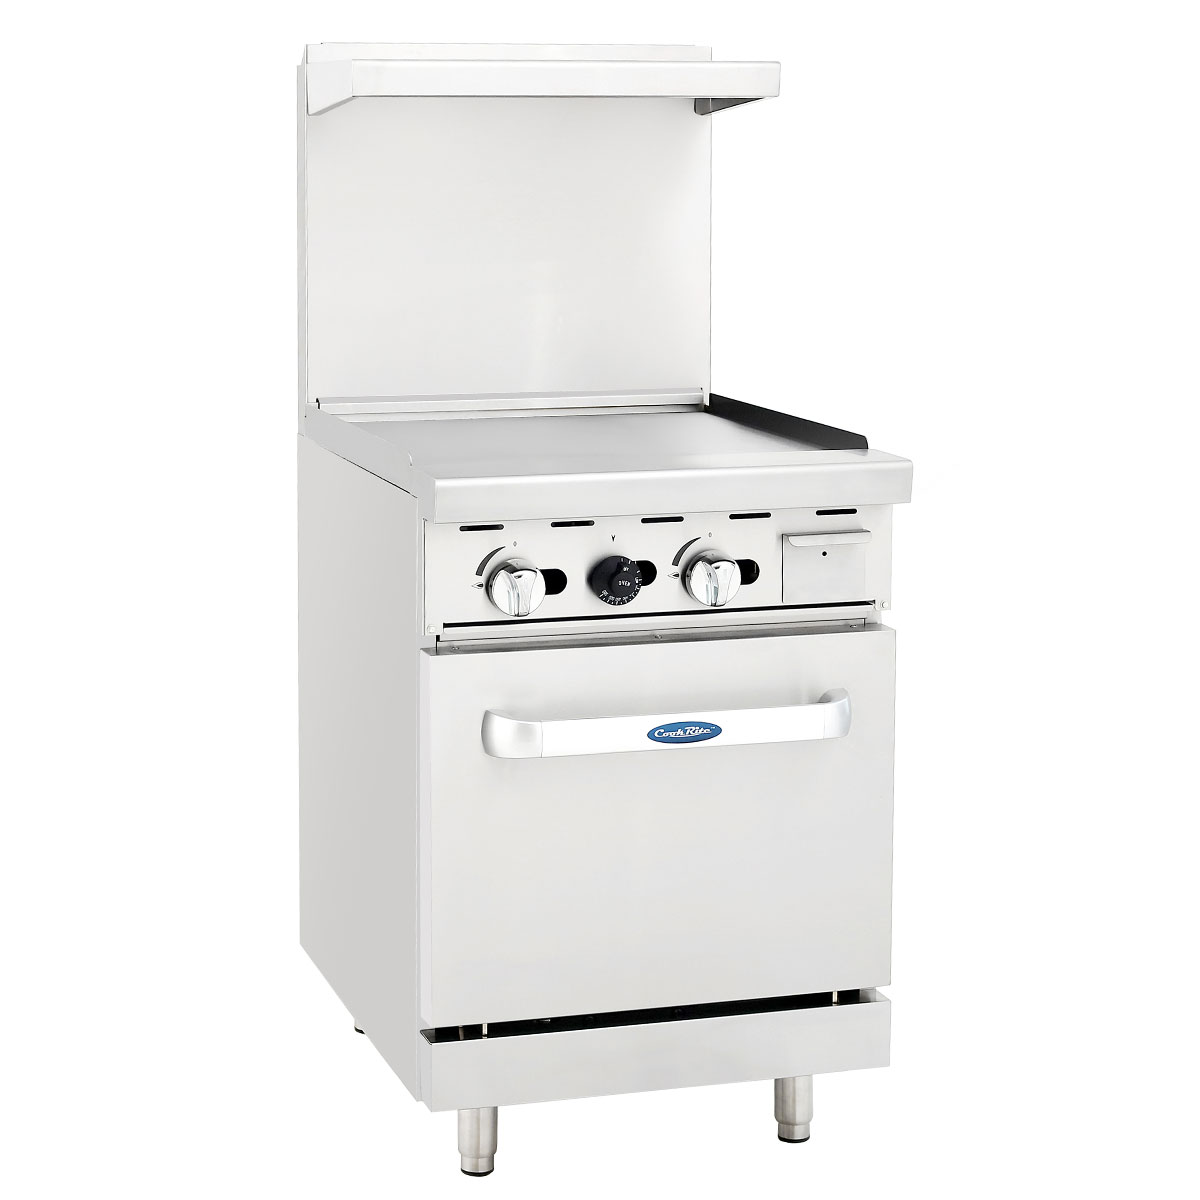 Atosa CookRite AGR-2B24GR, 36-Inch 2 Burner Heavy Duty Gas Range with  24-Inch Right Griddle and Single Oven